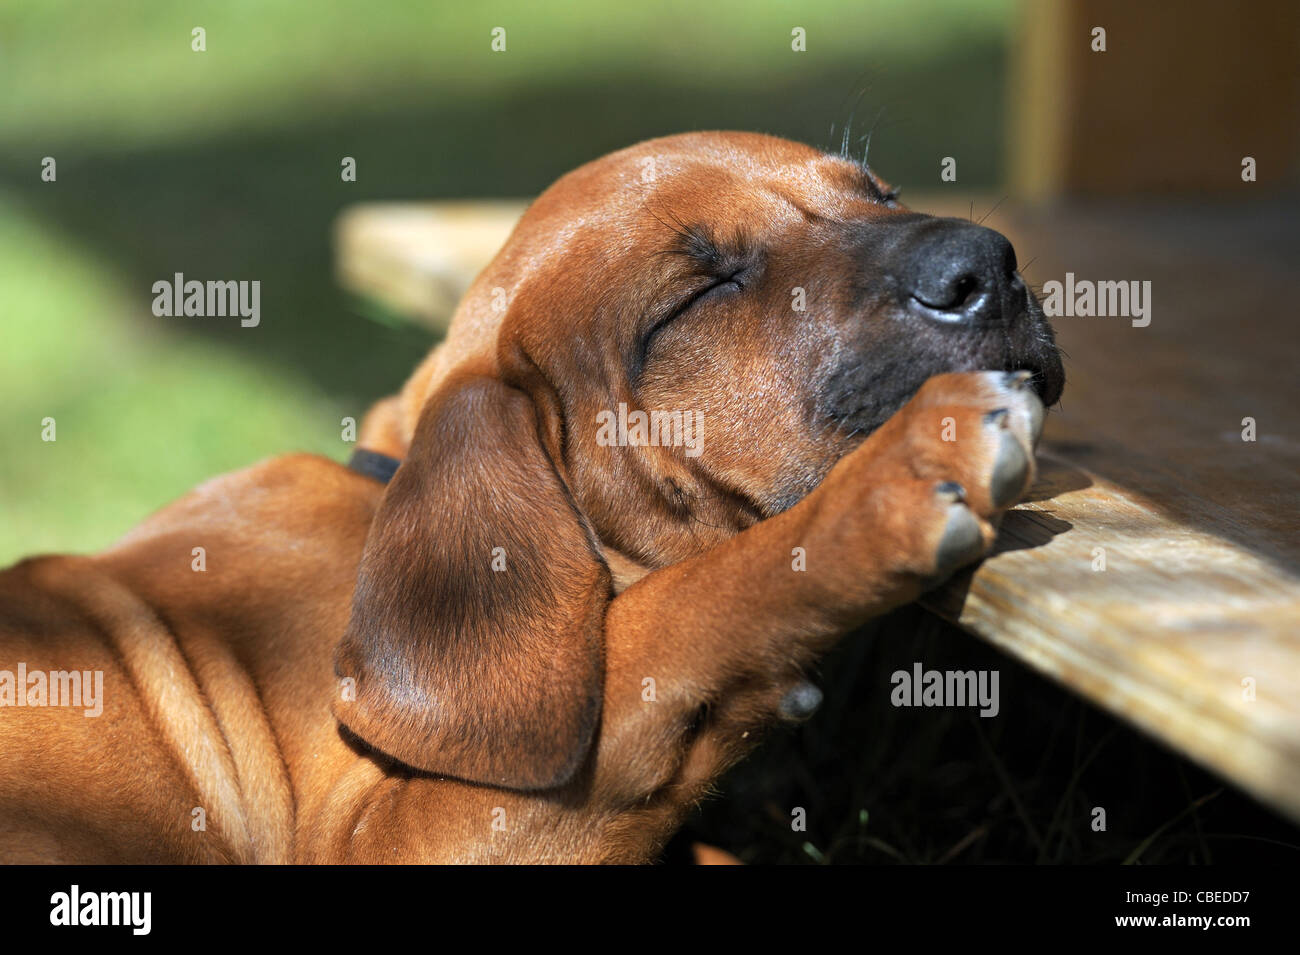 Rhodesian Ridgeback (Canis lupus familiaris). Puppy sleeping with its head on a wooden plank. Stock Photo